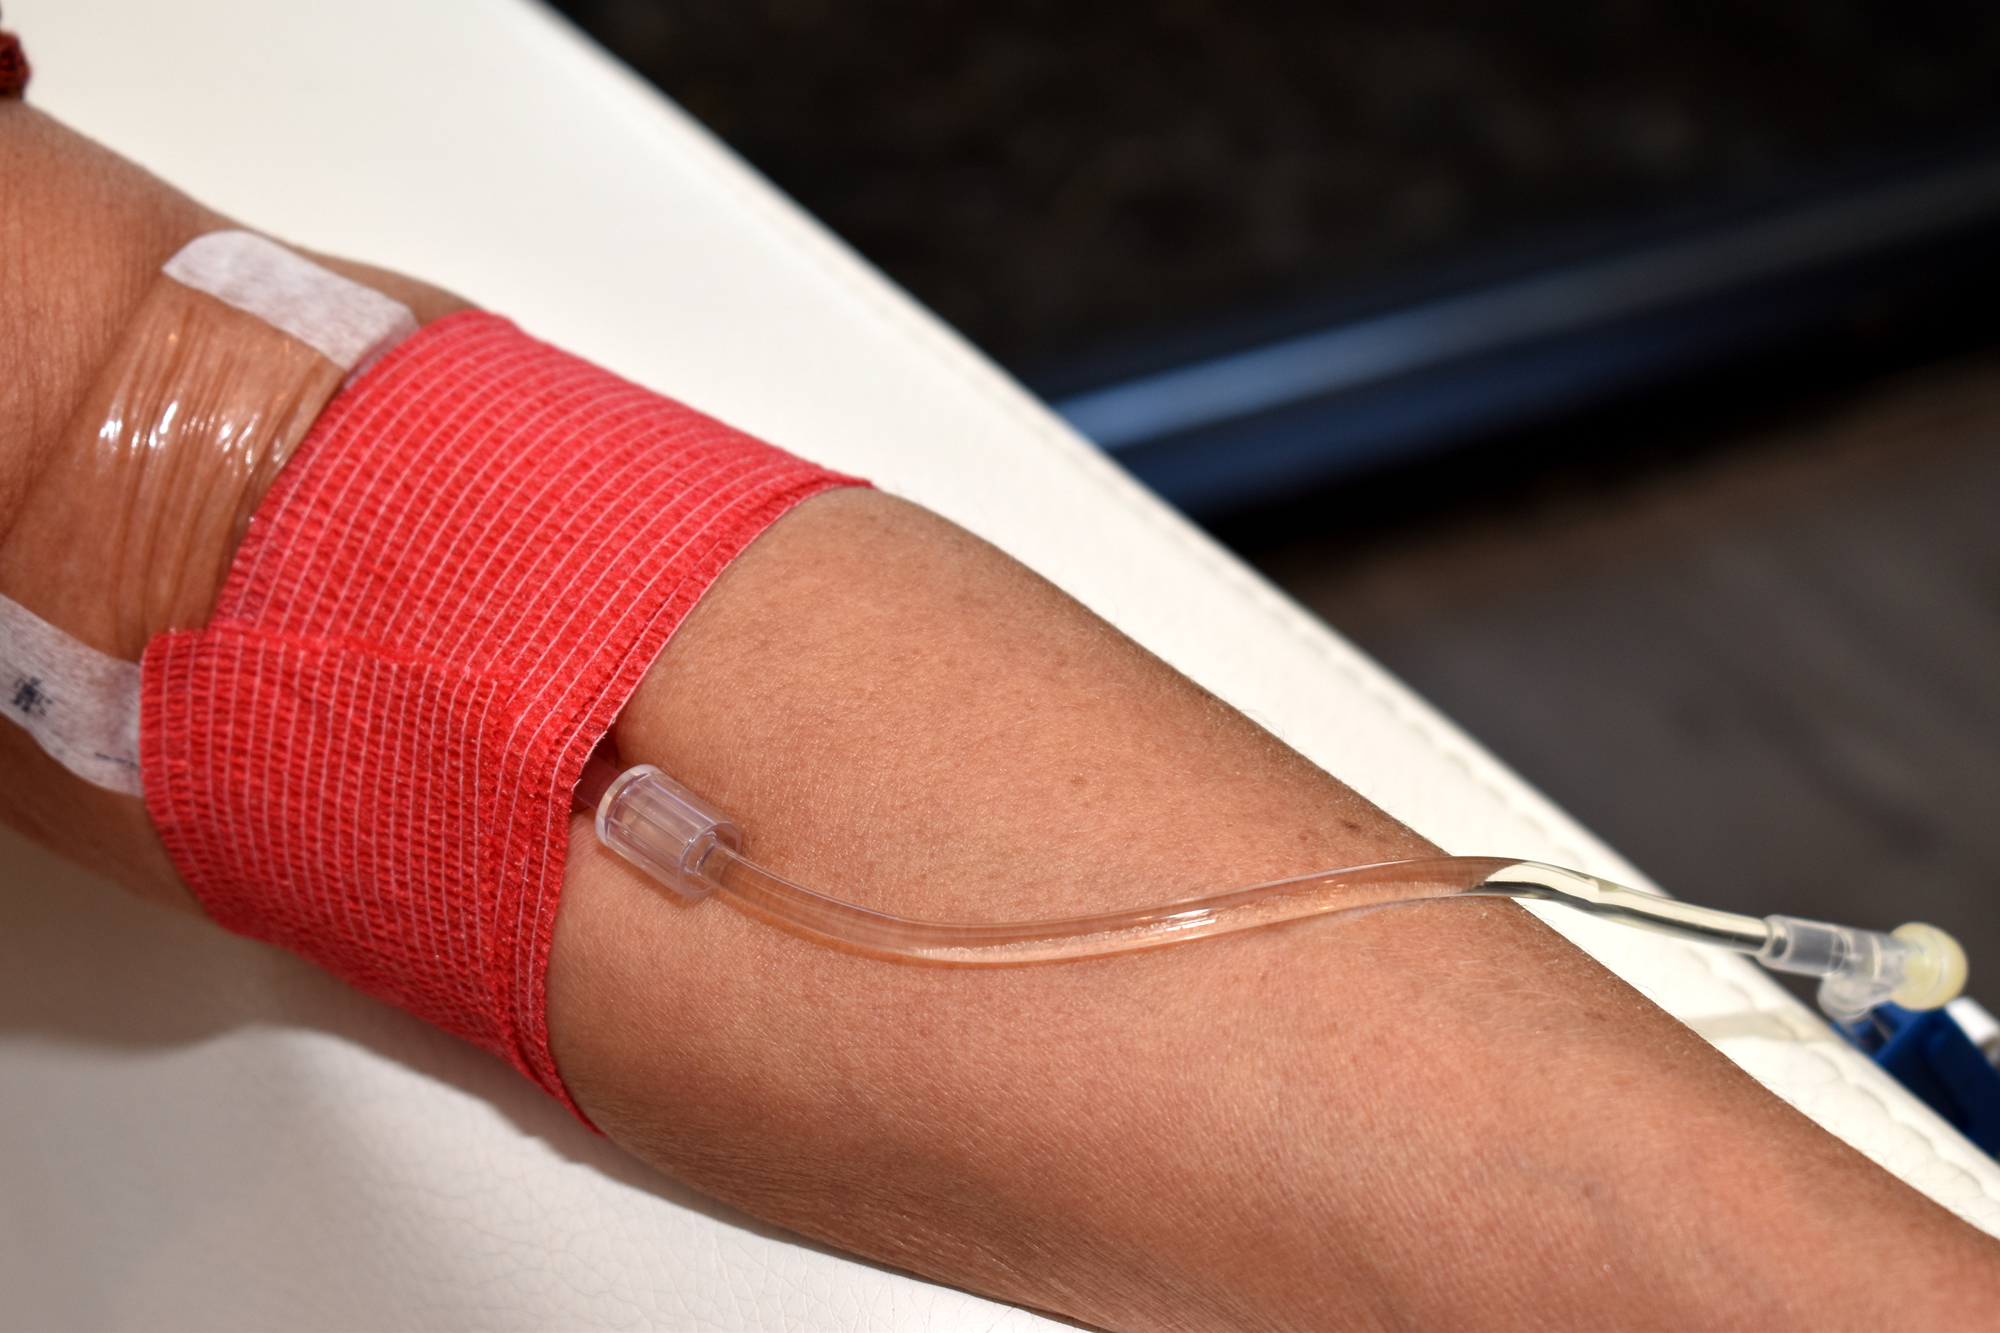 IV therapy can rehydrate the body and replenish it with vitamins and nutrients.